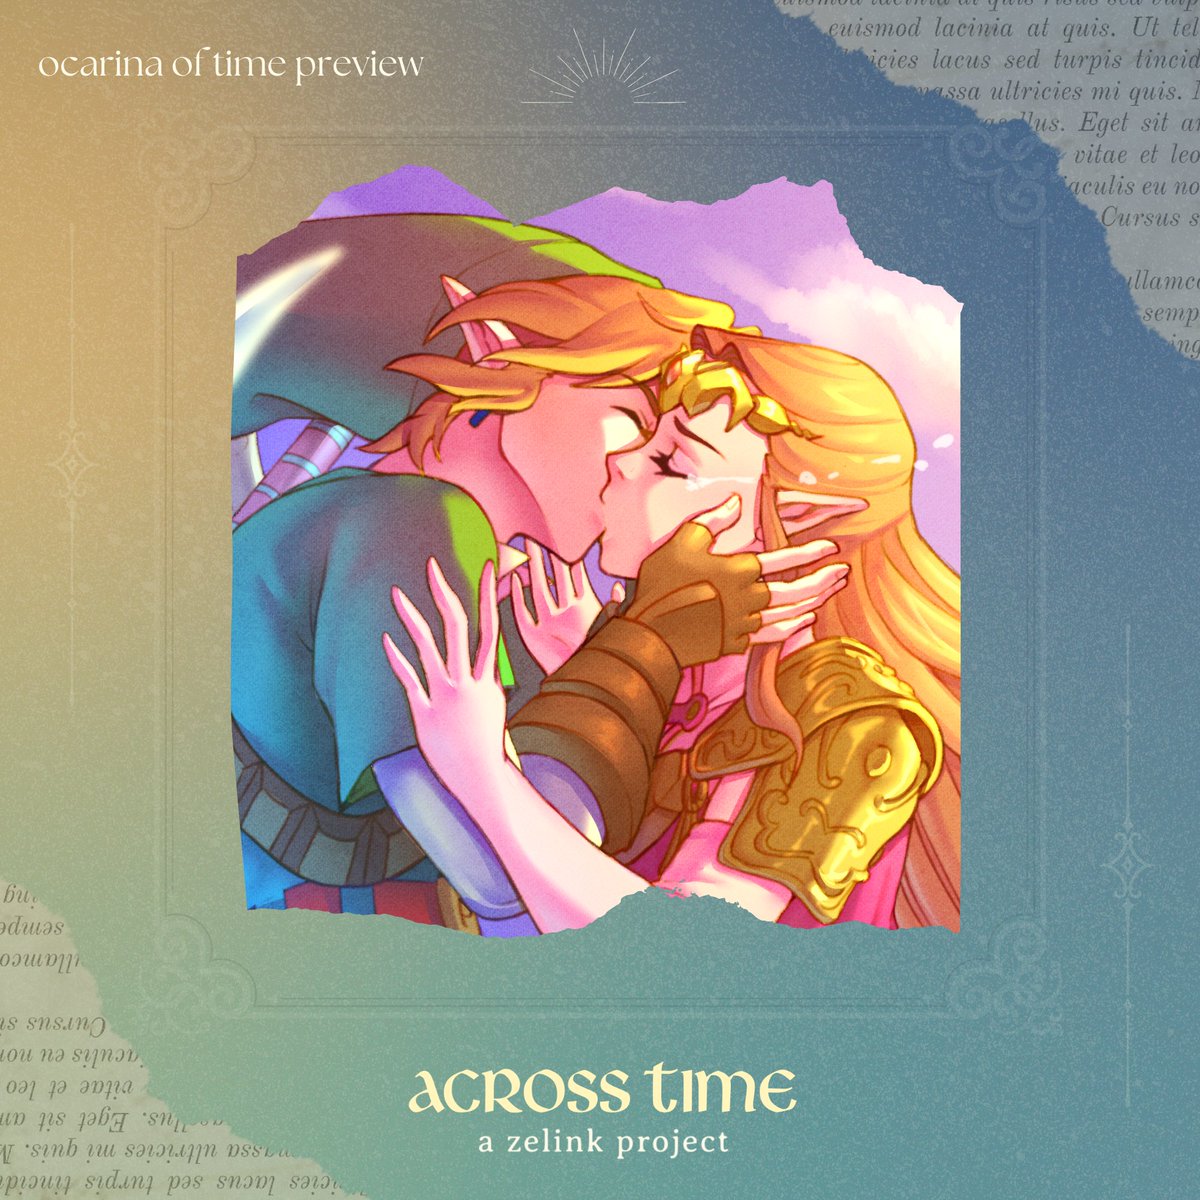 💚🩵 Artist Preview: Ocarina of Time 🩵💚

Do soulmates with tragic endings captivate you? Then you'll love to see @Asma_Art1’s full illustration during our event in June!

#TheLegendofZelda #Zelink #AcrossTime